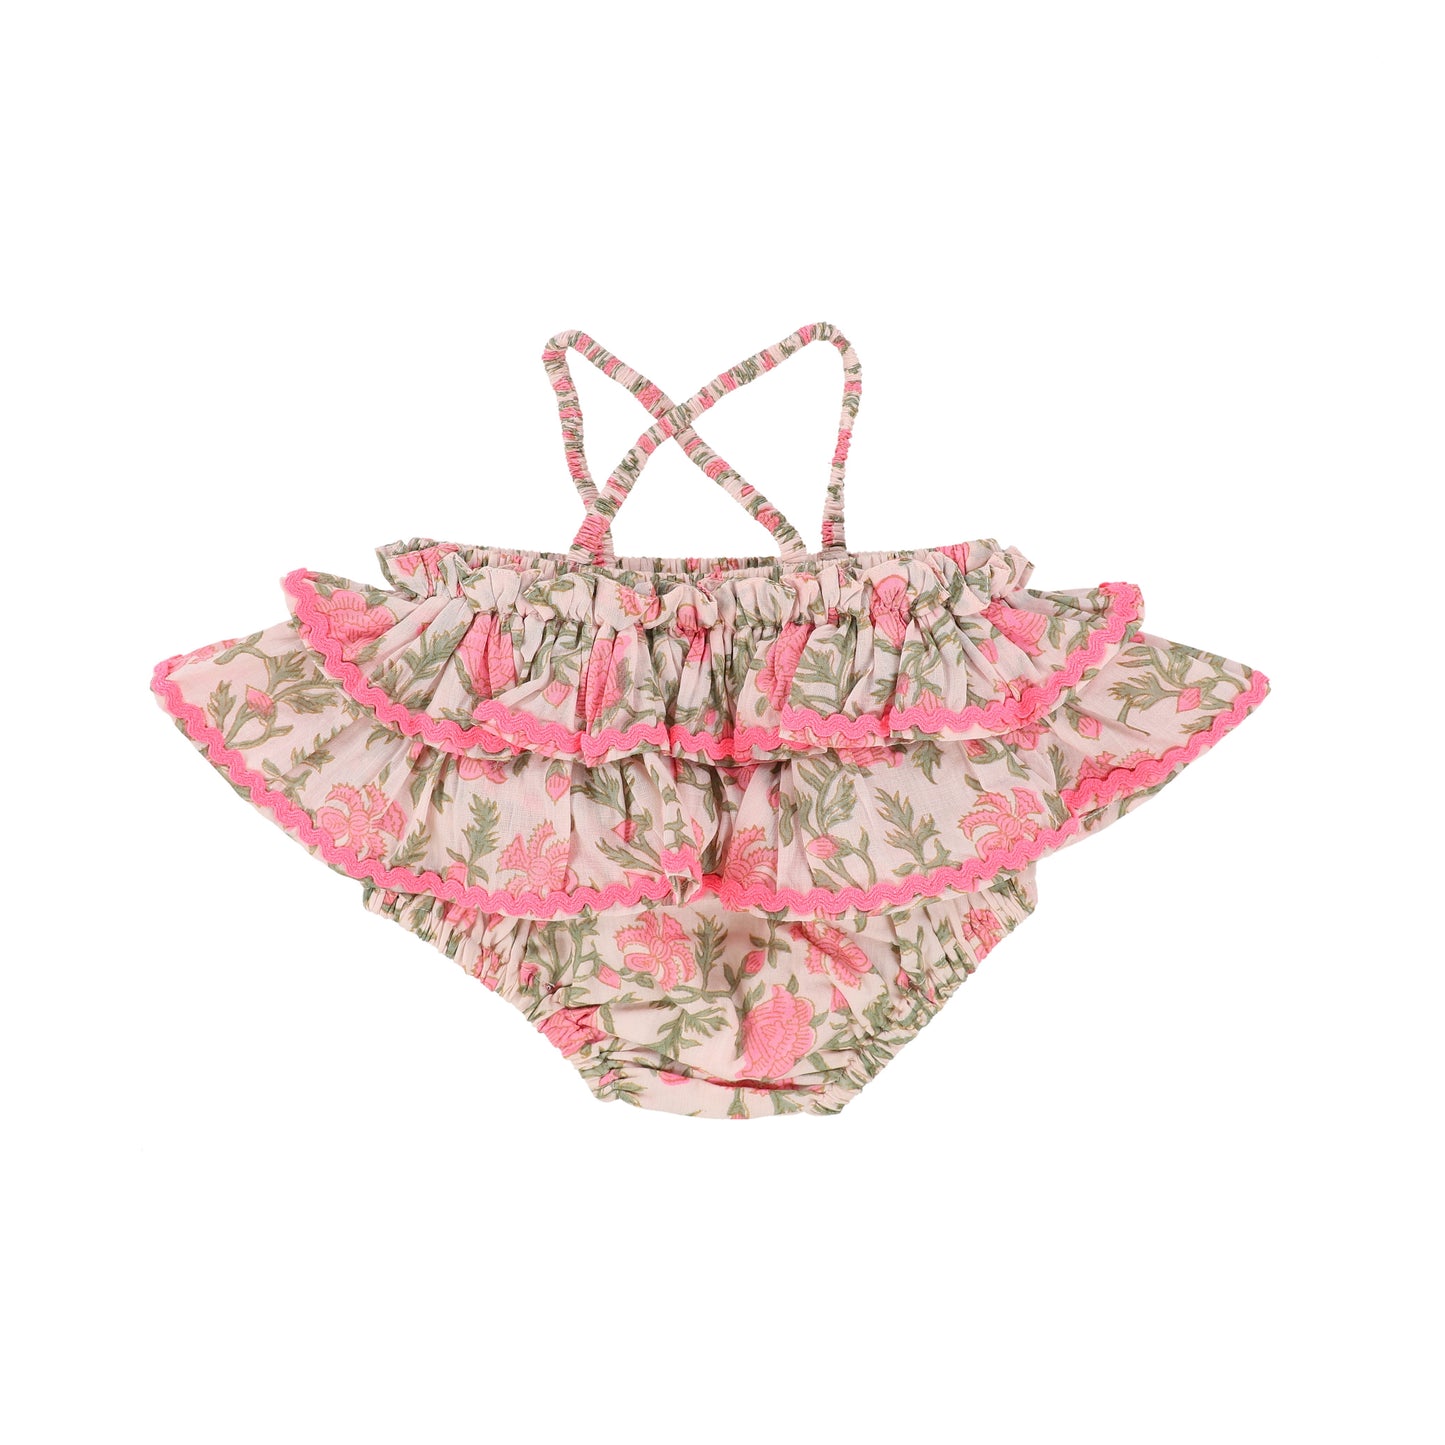 PAISLEY MAGIC DUSTY PINK FLORAL PRINT RUFFLE SCALLOP TRIM SUSPENDER BLOOMERS [Final Sale]